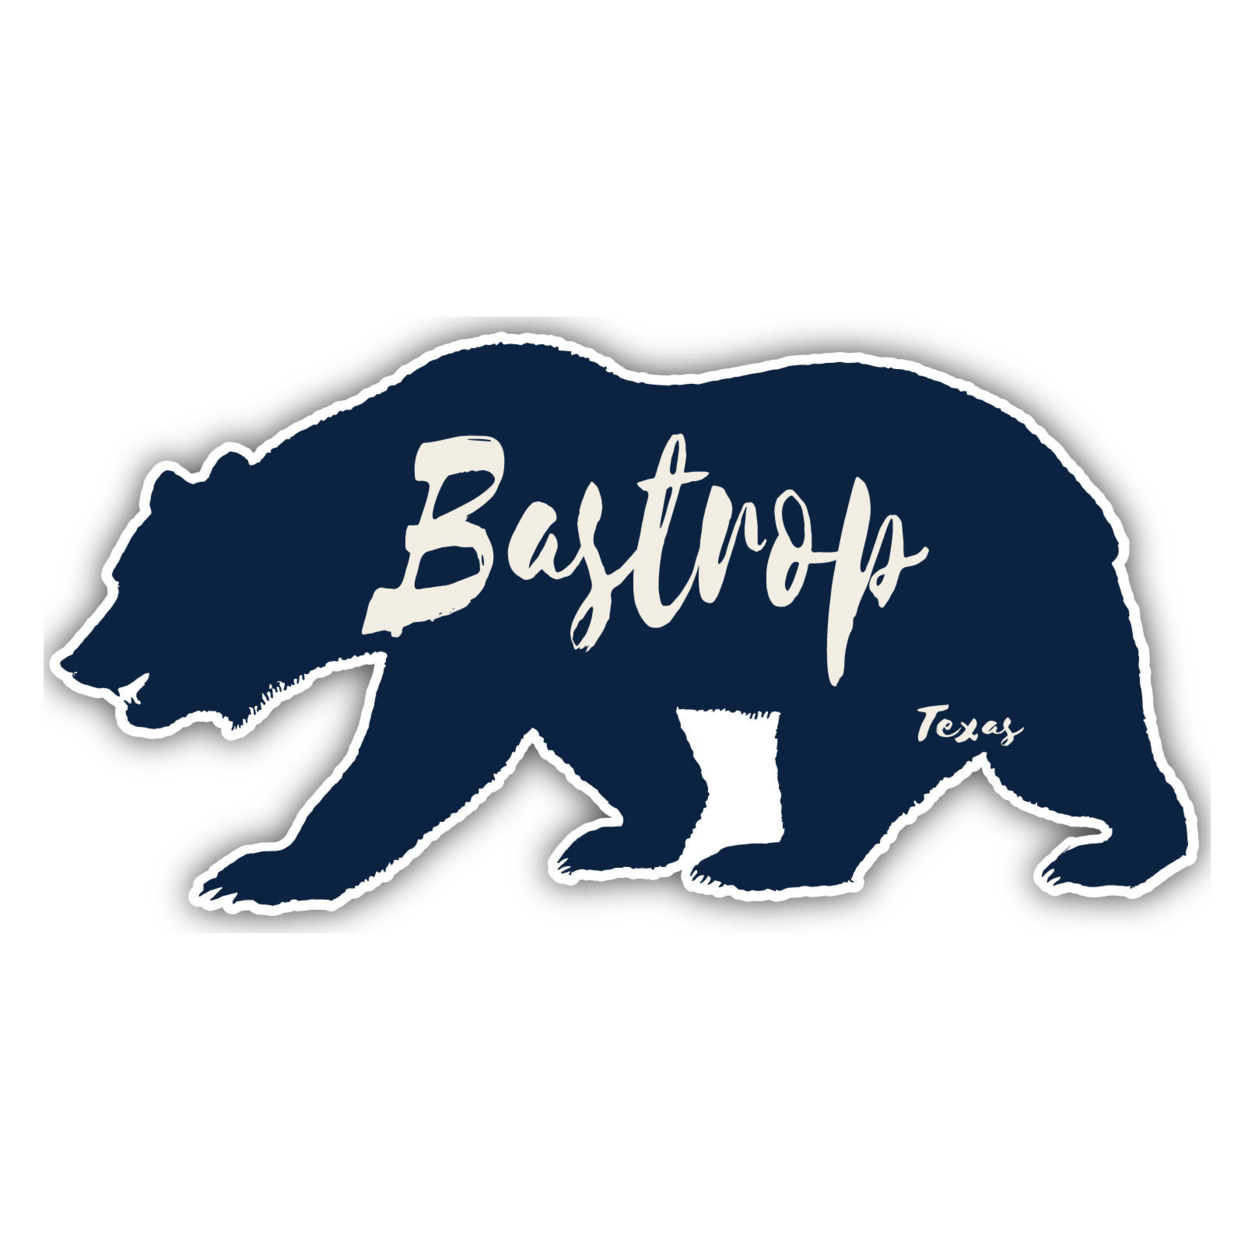 Bastrop Texas Souvenir Decorative Stickers (Choose Theme And Size) - 4-Pack, 4-Inch, Bear